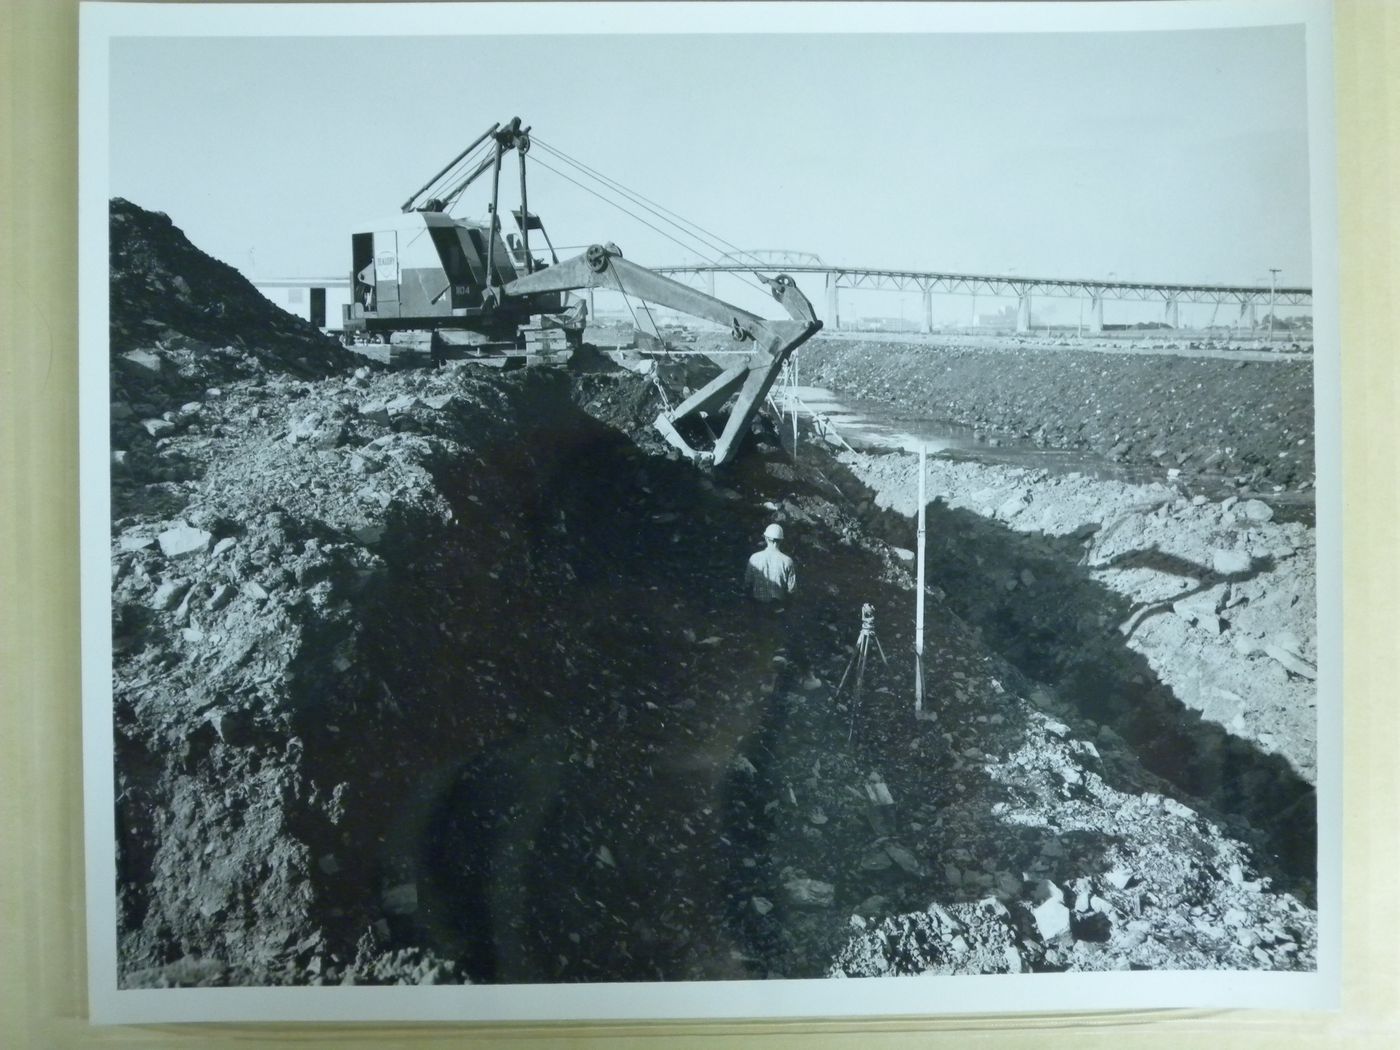 View of a power shovel in action on construction site at an early stage, Expo 67, Montréal, Québec